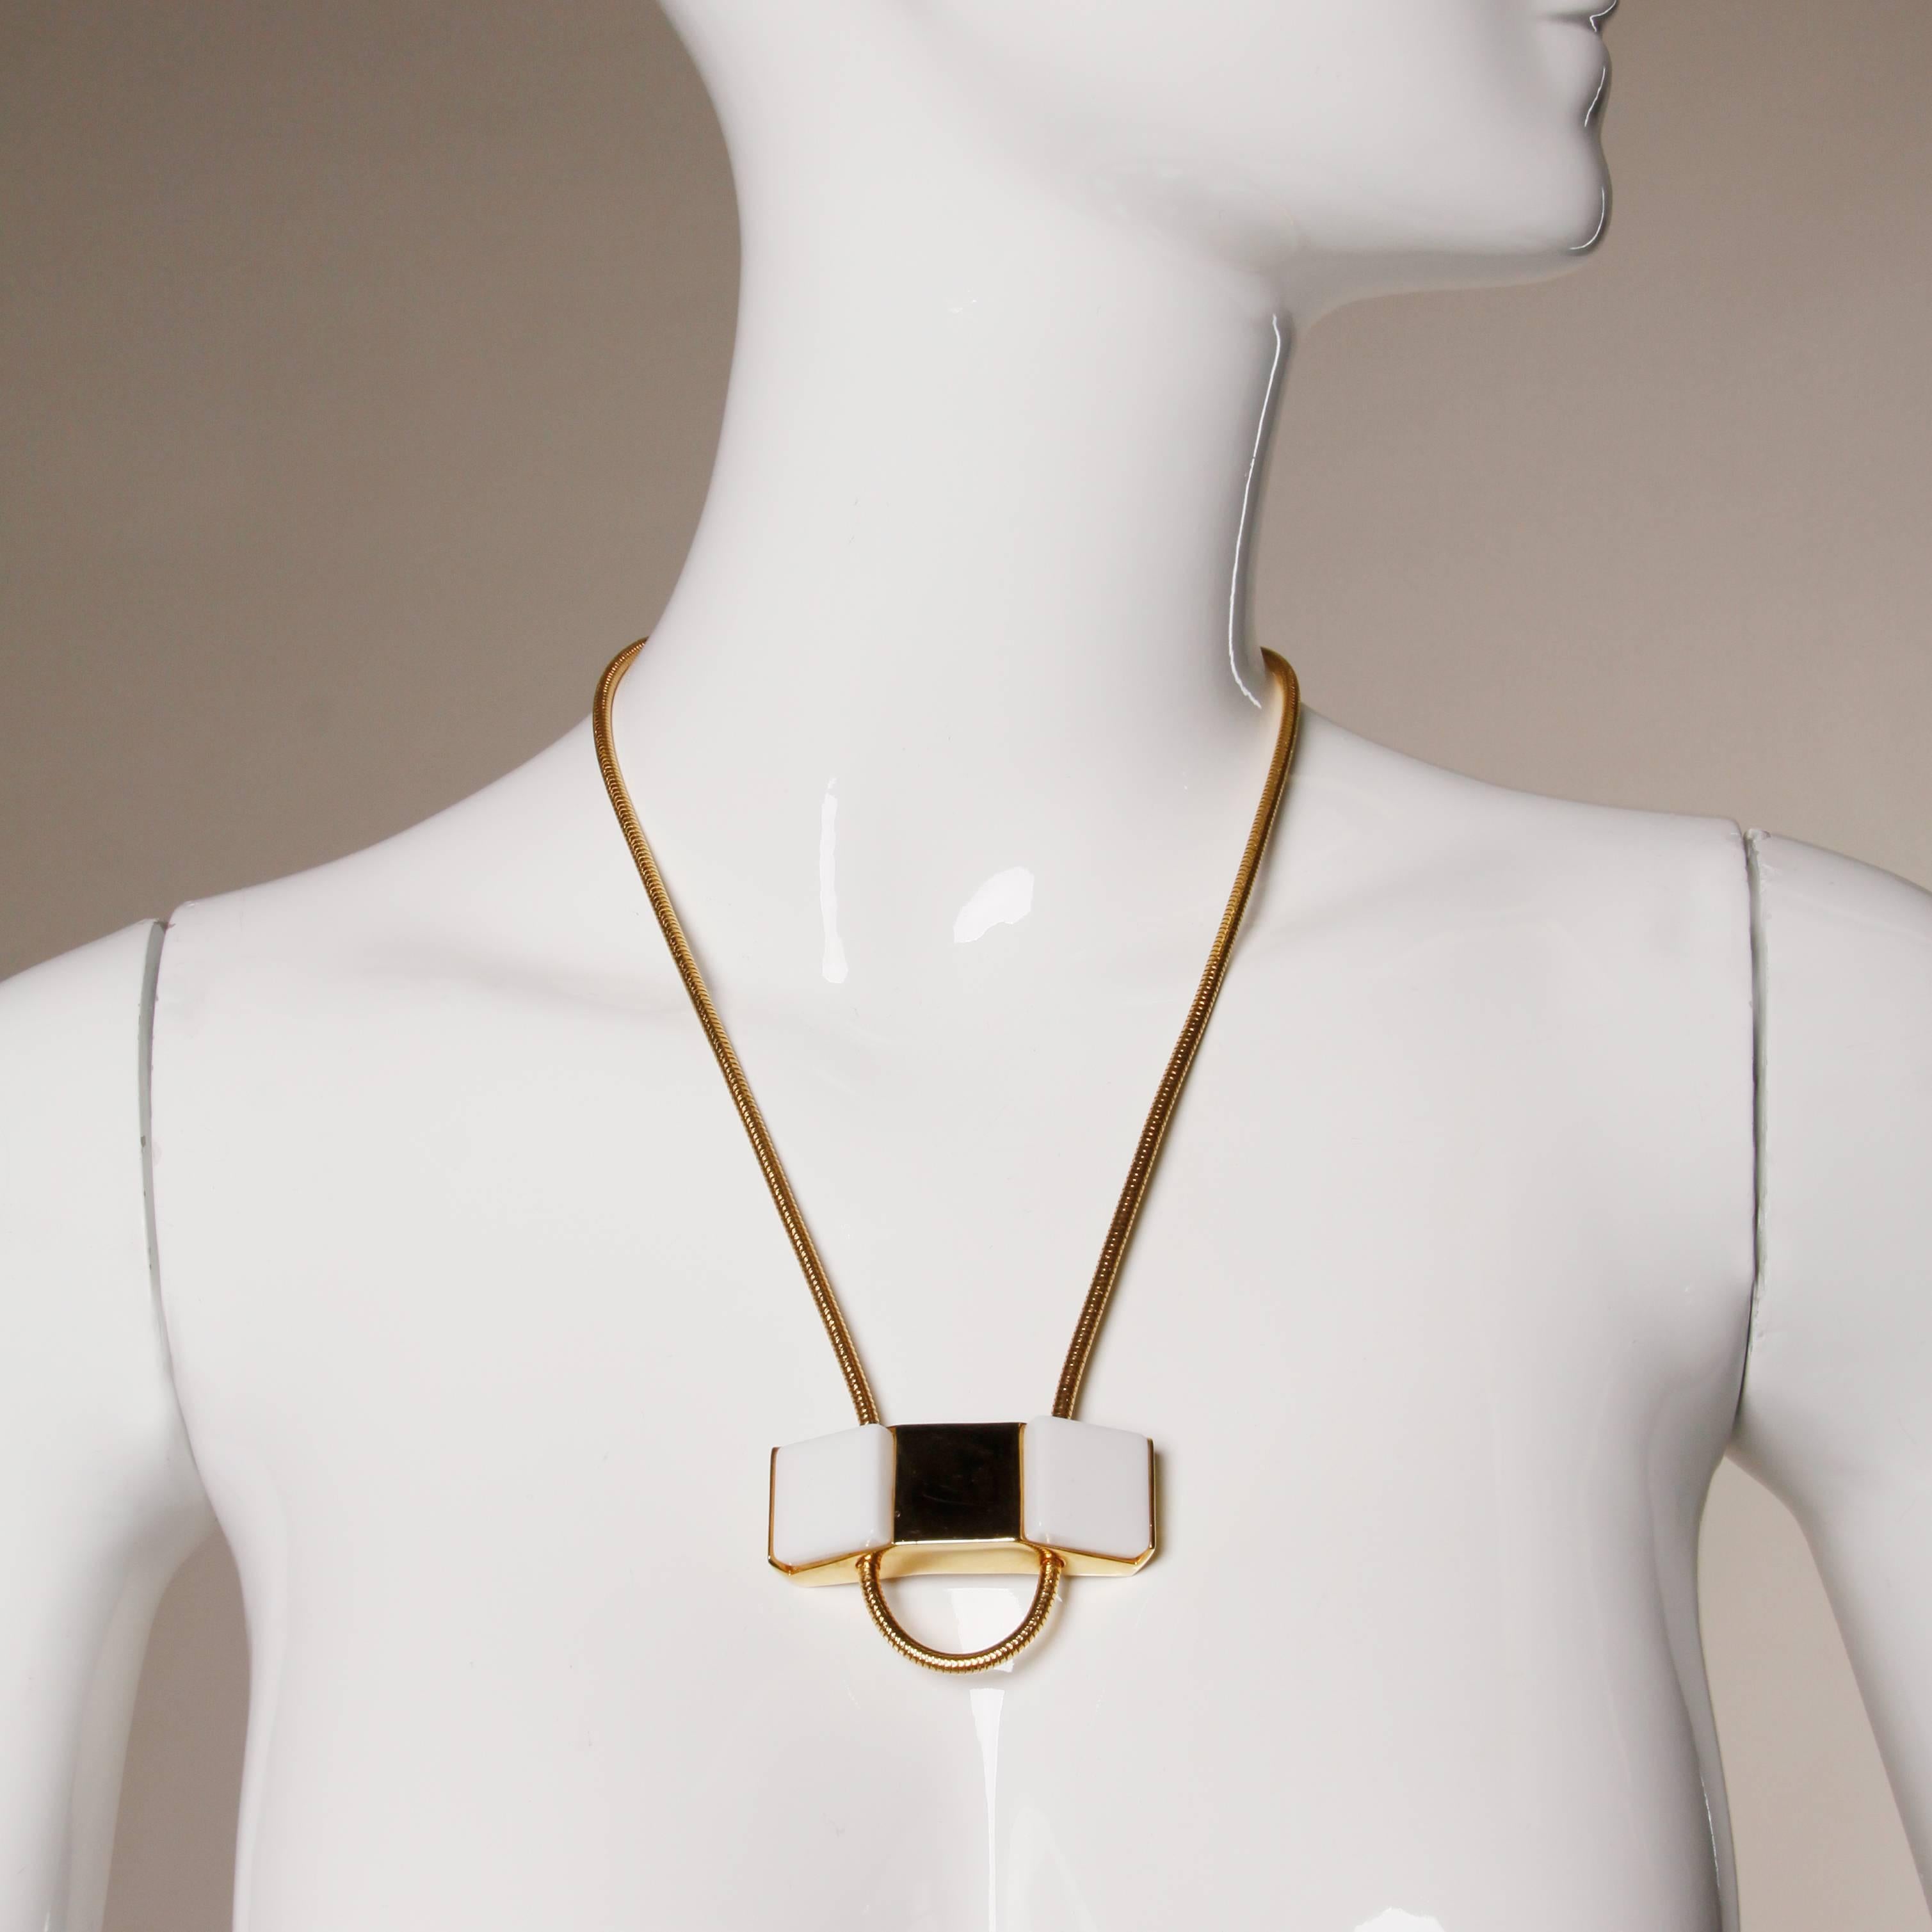 Incredible vintage 1960s Pierre Cardin gold tone modernist necklace. Chunky geometric shape with white acrylic squares and snake chain. Signed on the back of the piece. The pendant measures 2.5